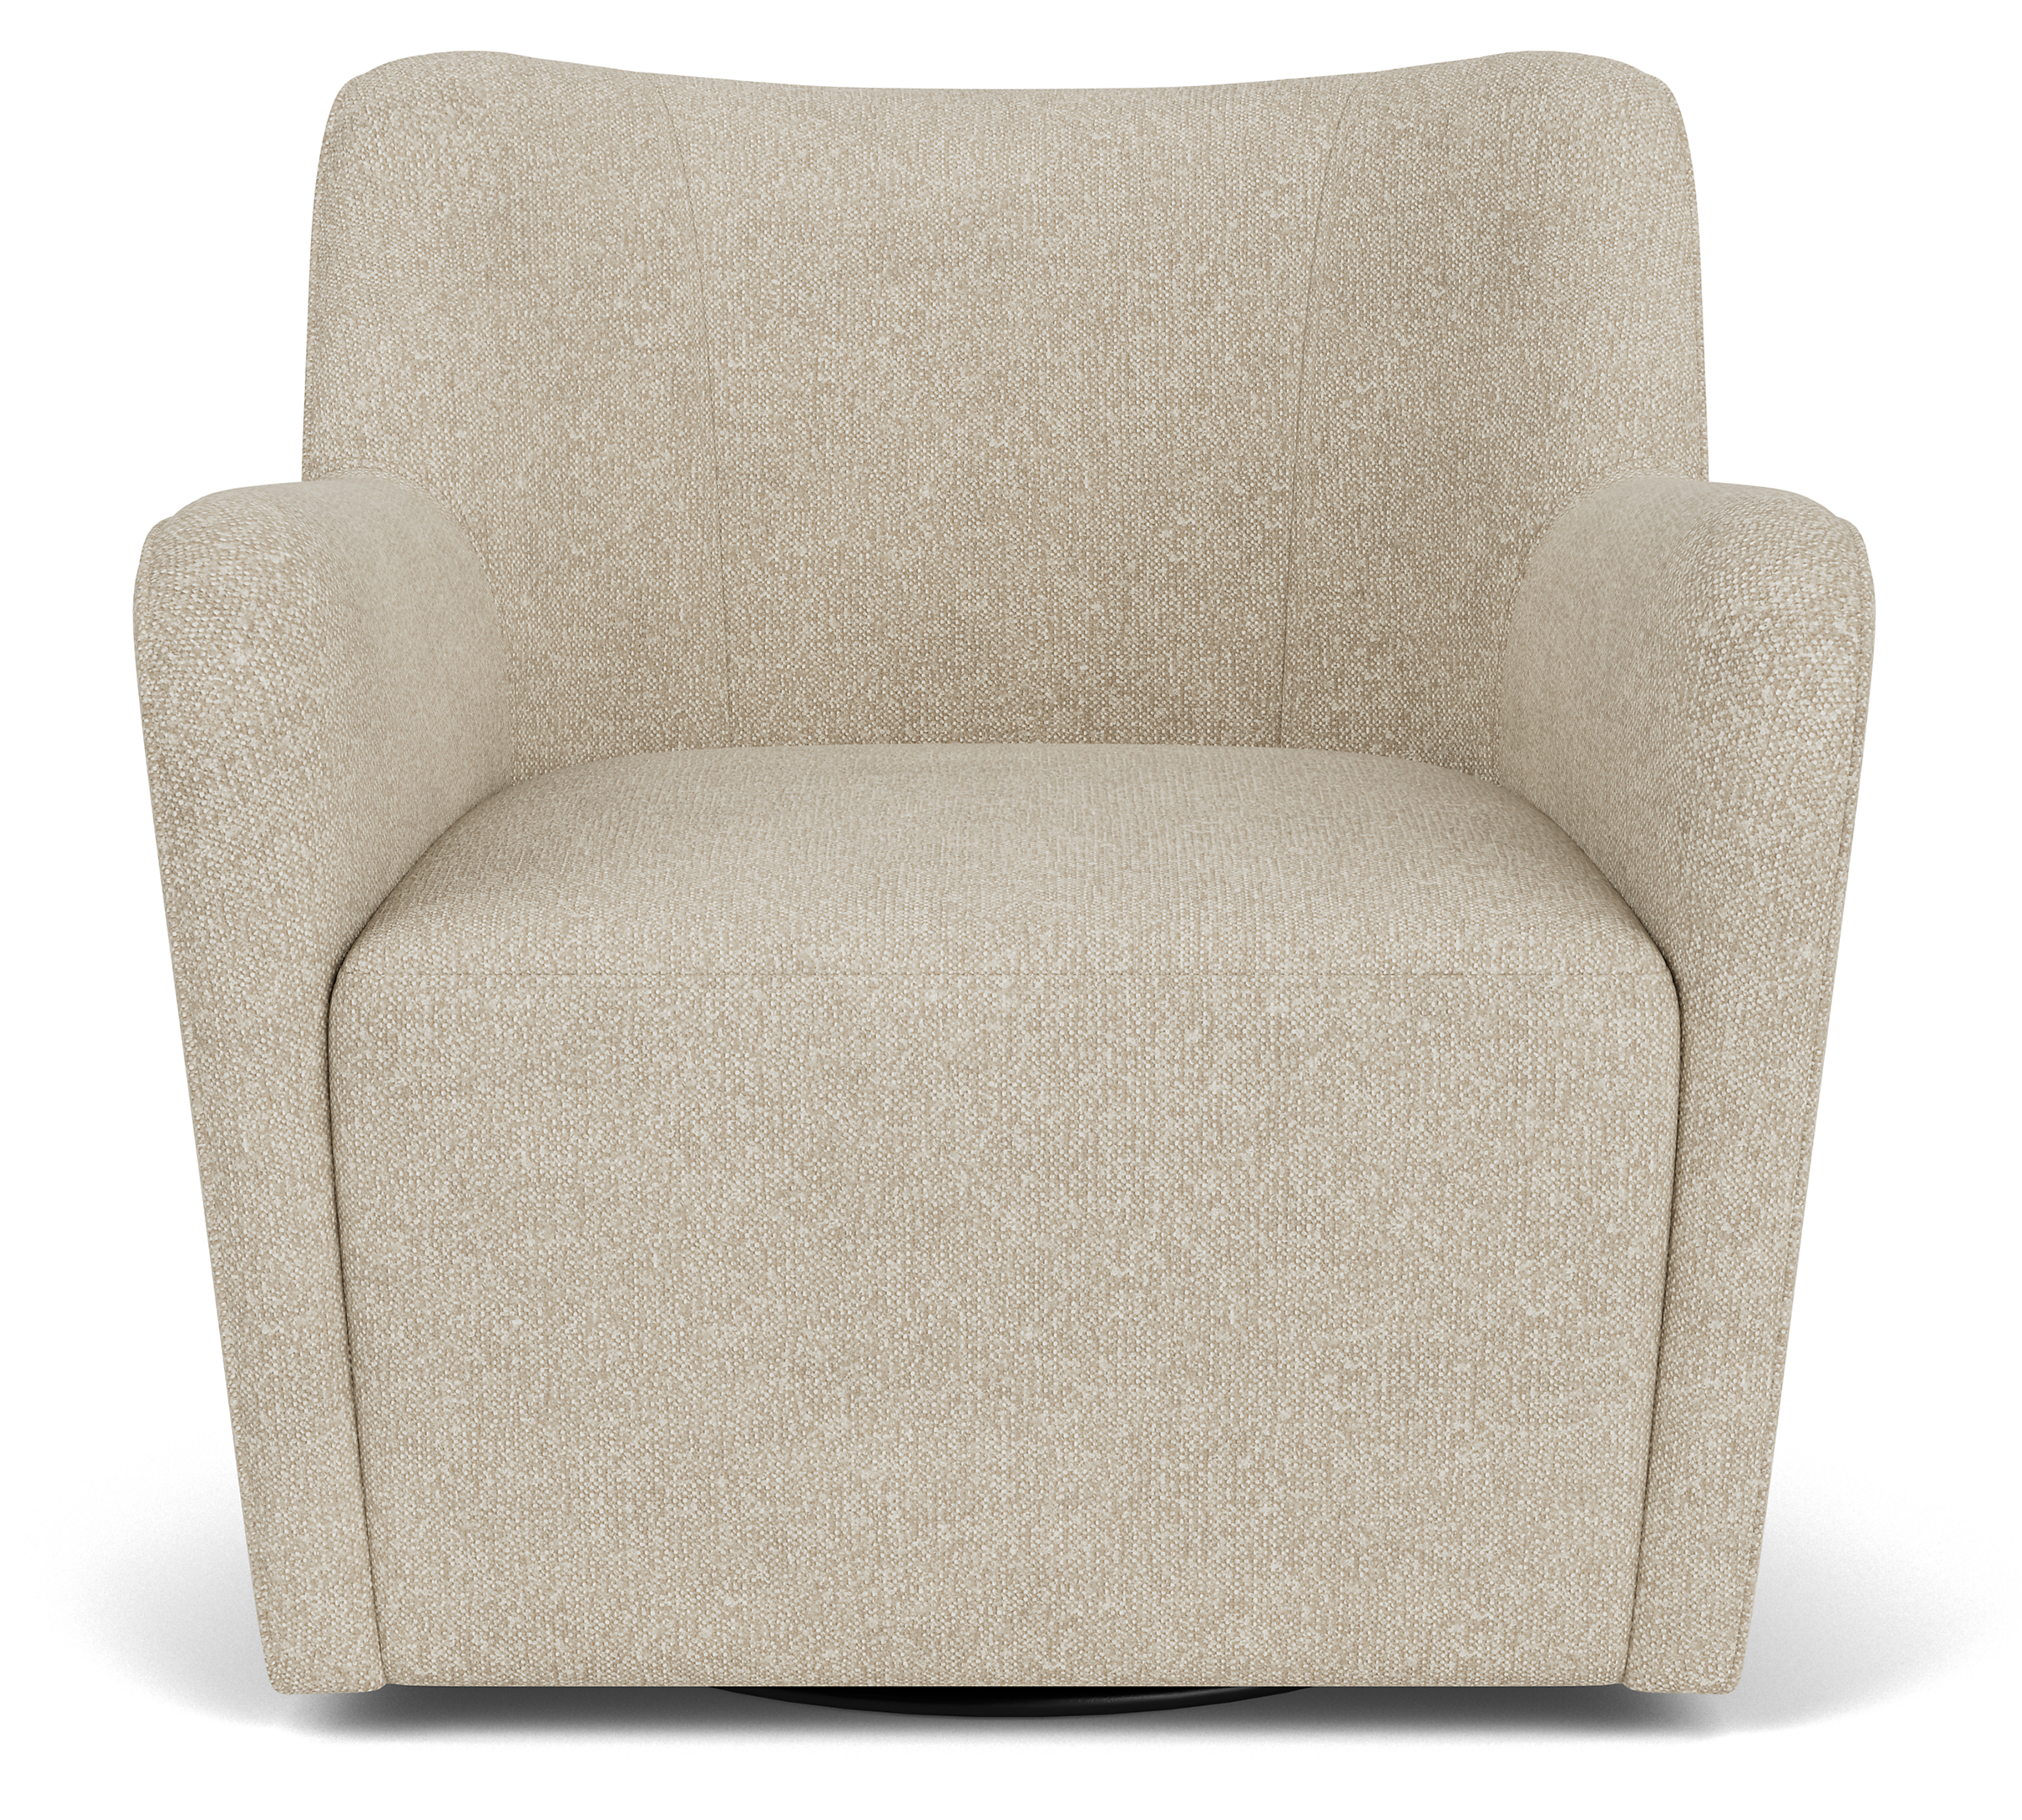 front view of Lily Swivel Chair in Conley Natural.